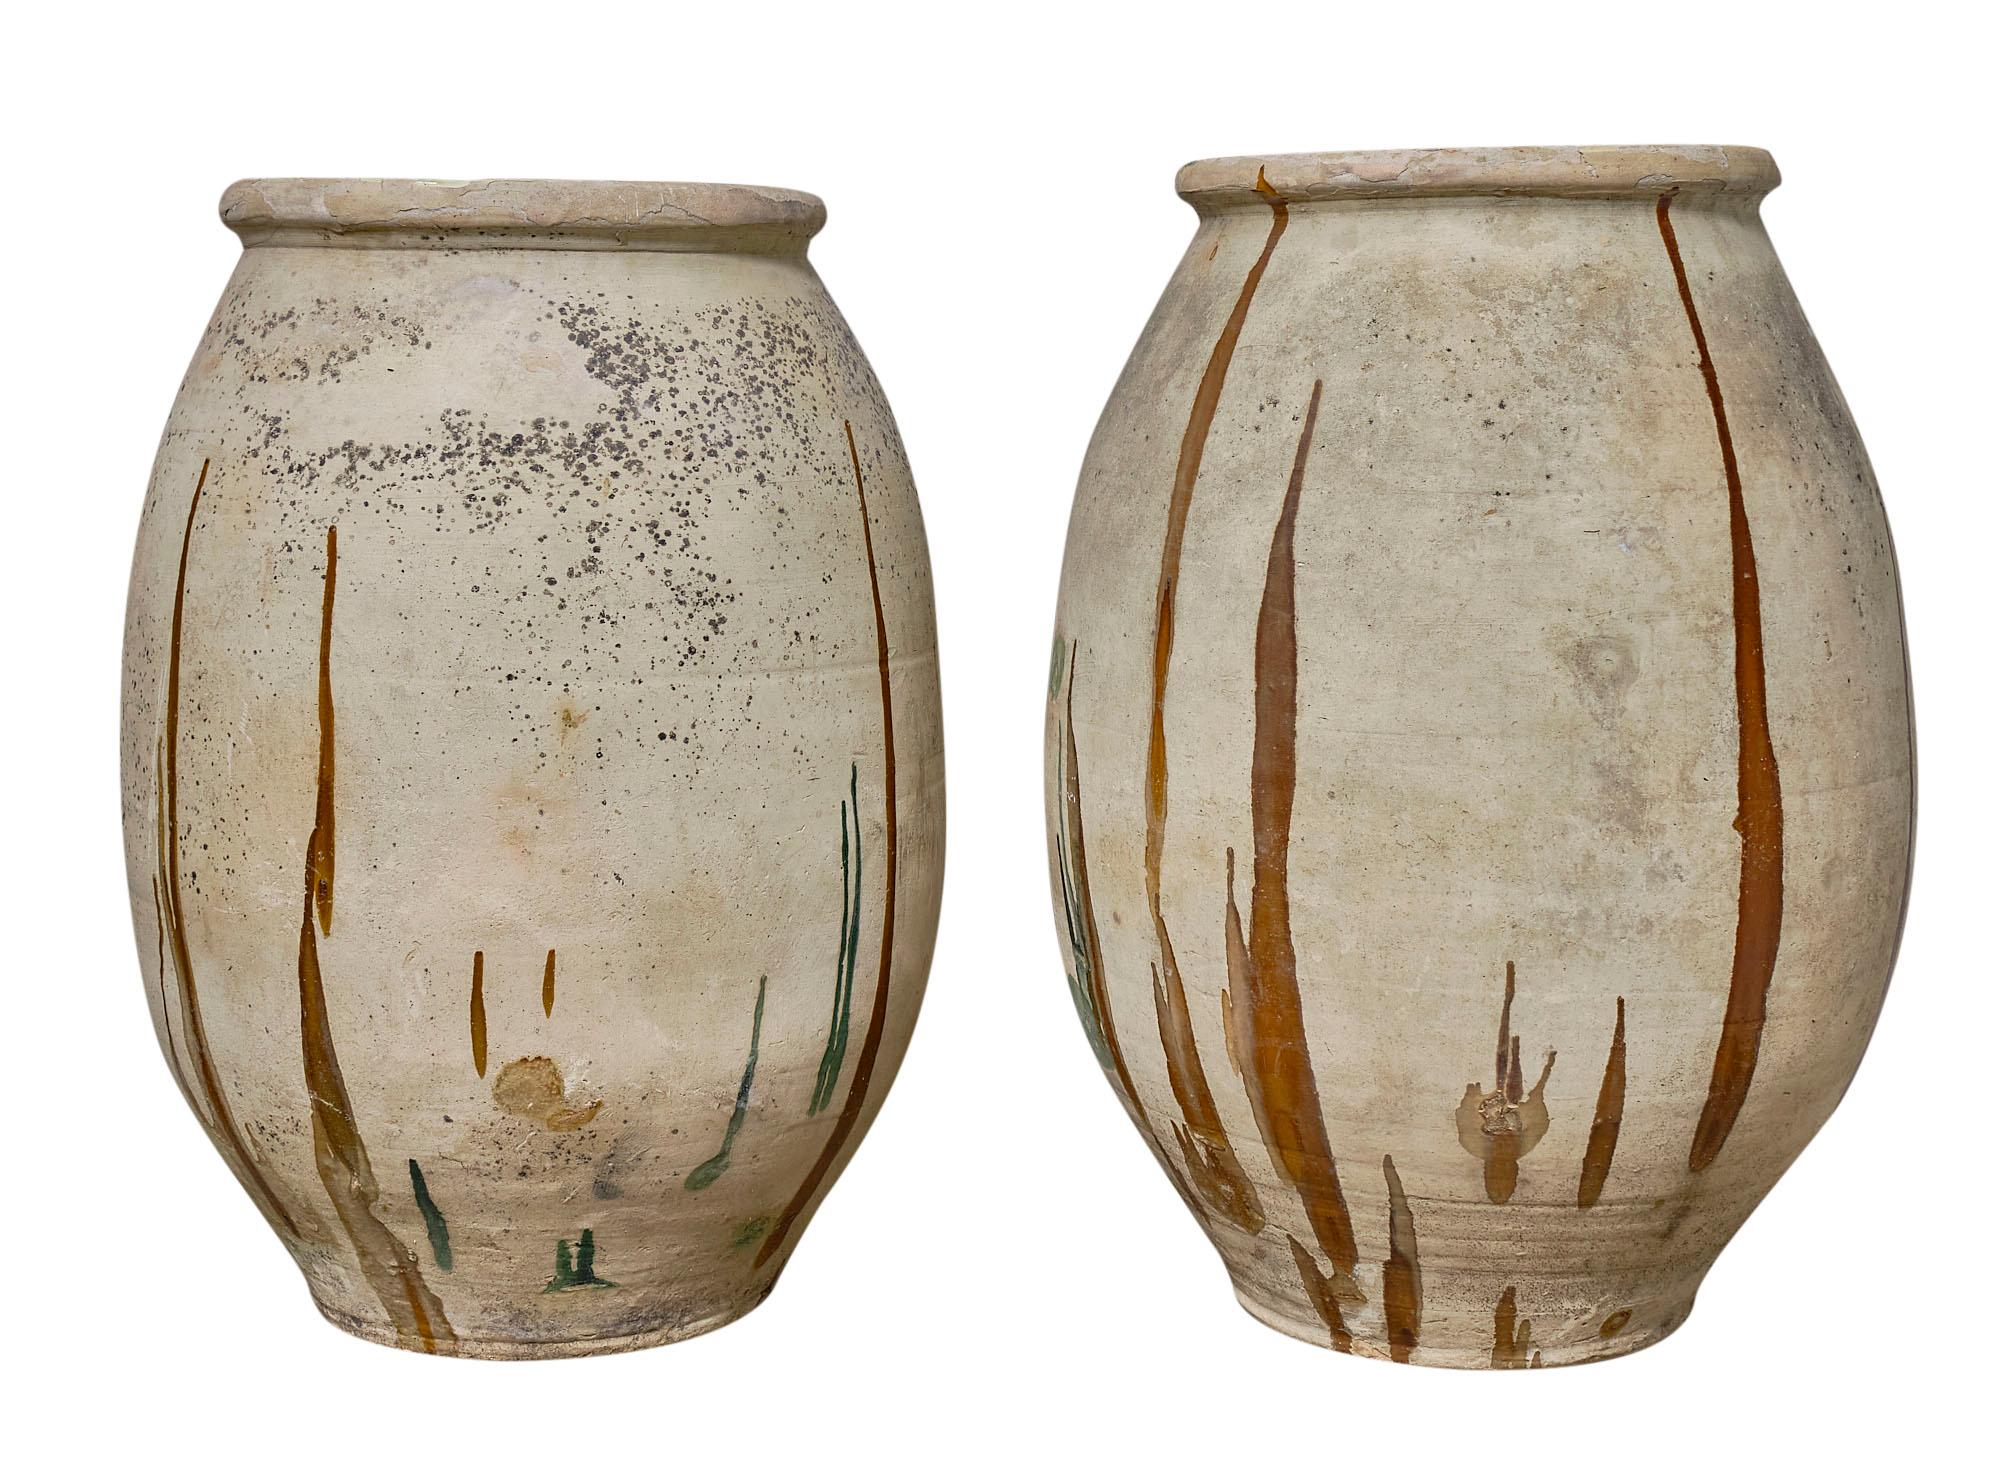 These antique Biot pots of considerable size will lure in any view! Originally used to hold oil; the interiors of the pots are glazed with the signature color of the region of origin in Southern France. The original glaze is still in great shape and